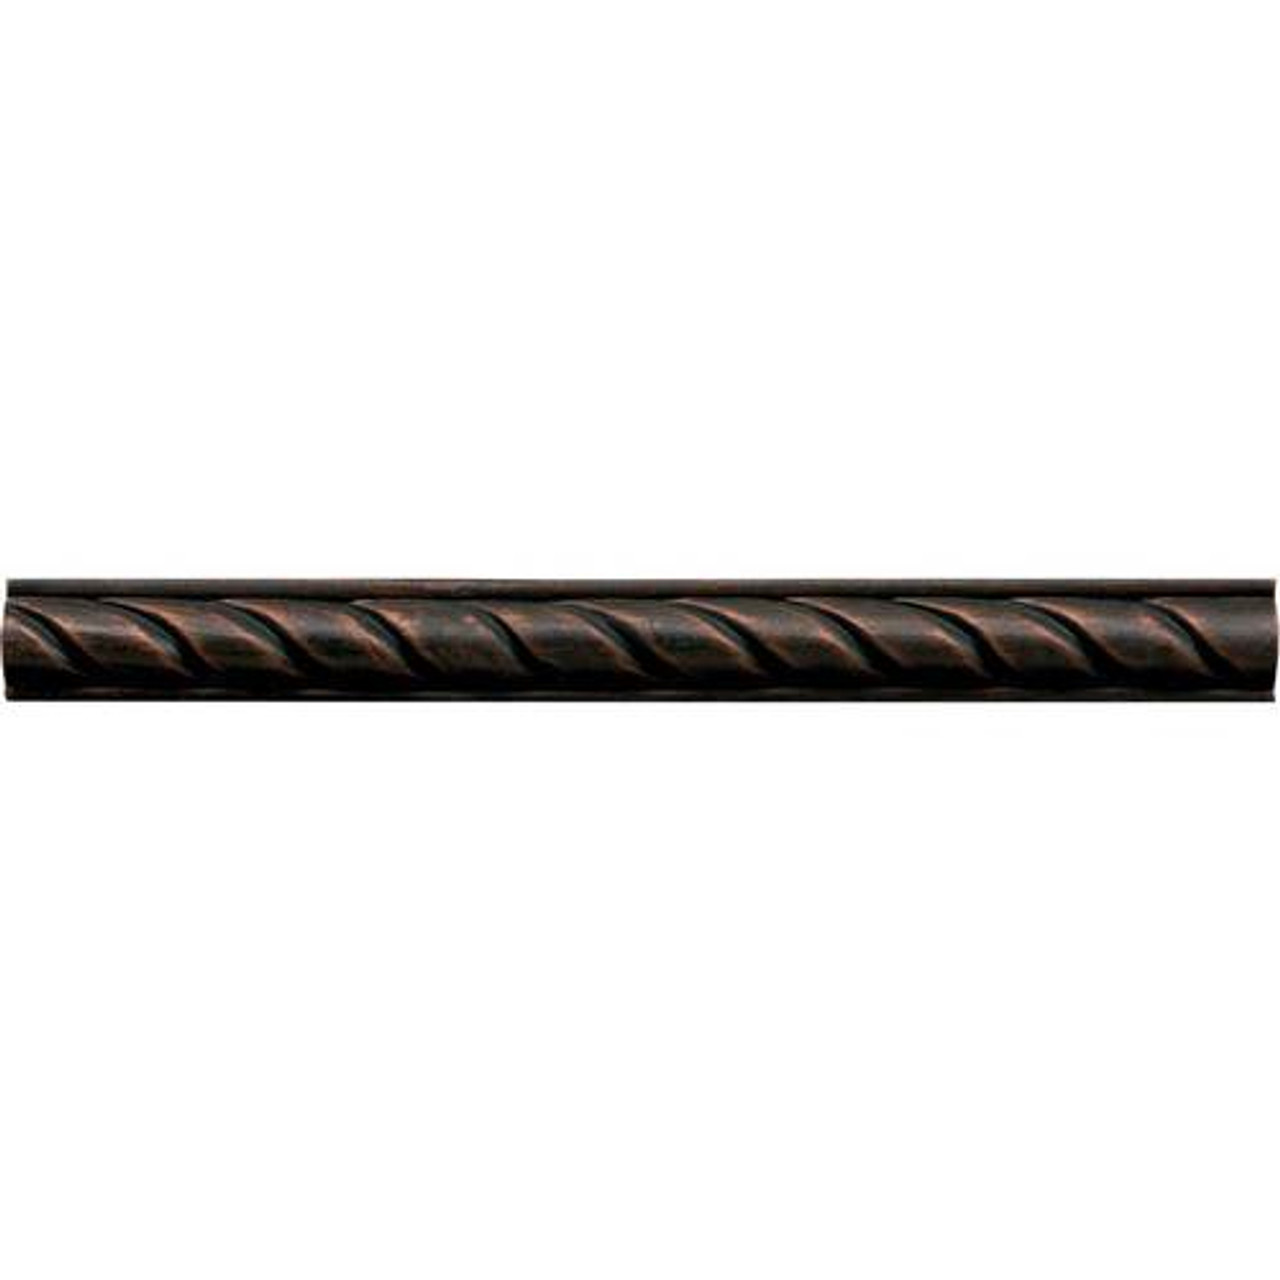 Armor Guilded Copper Rope 1x12 - Tiles Direct Store